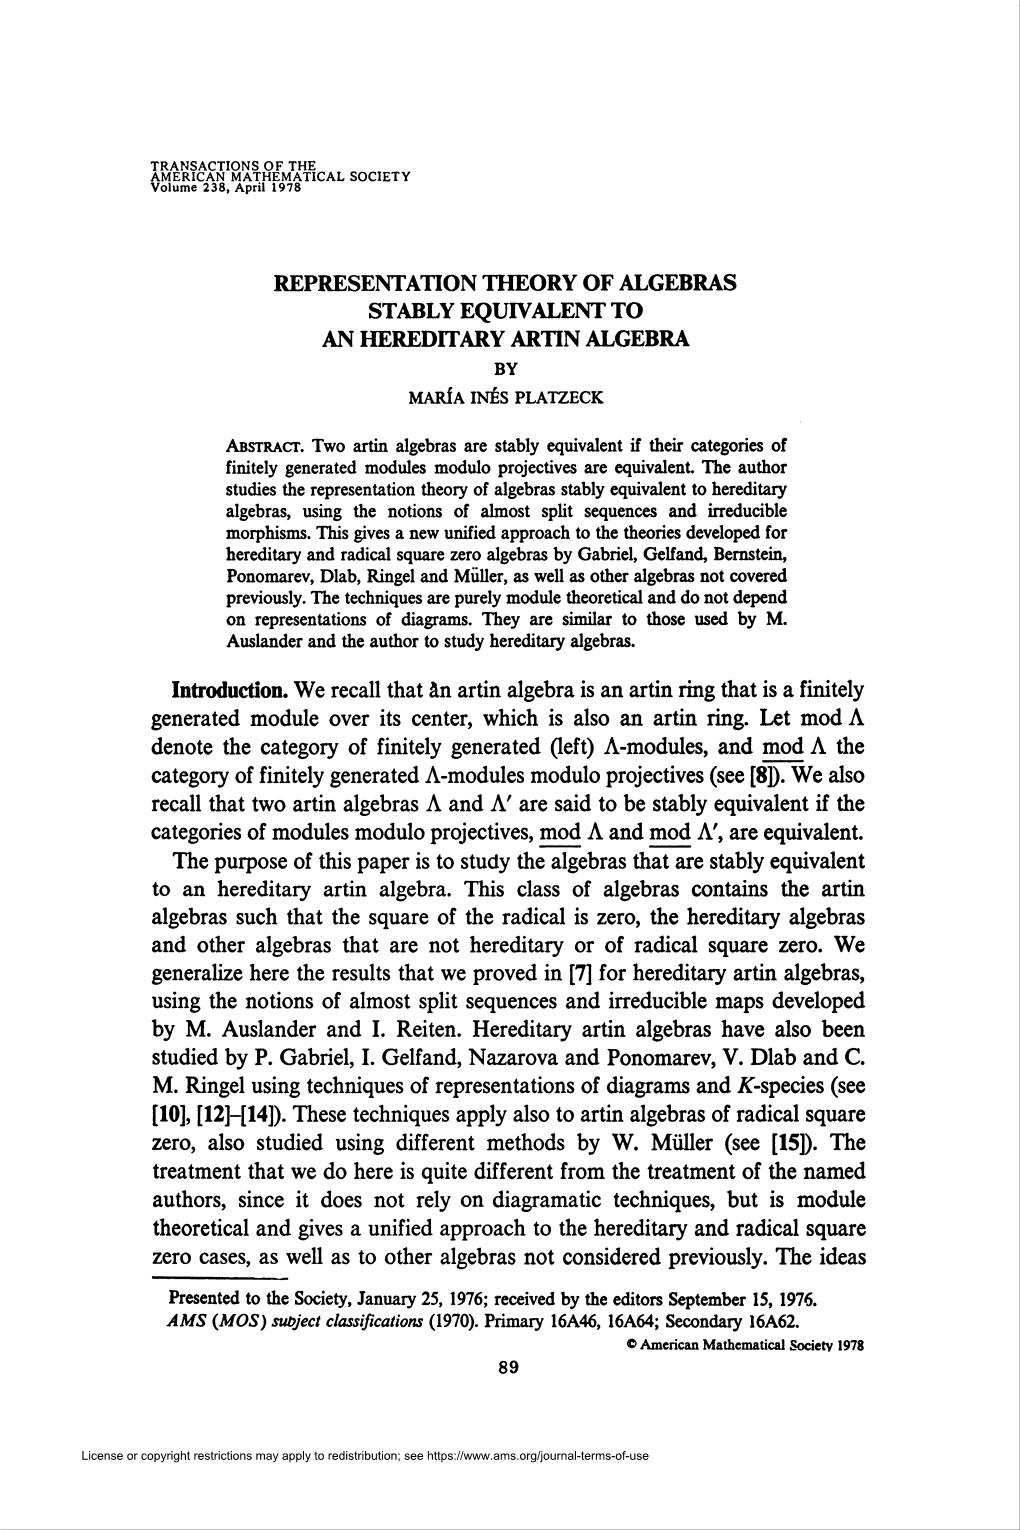 Representation Theory of Algebras Stably Equivalent to Hereditary Algebras, Using the Notions of Almost Split Sequences and Irreducible Morphisms